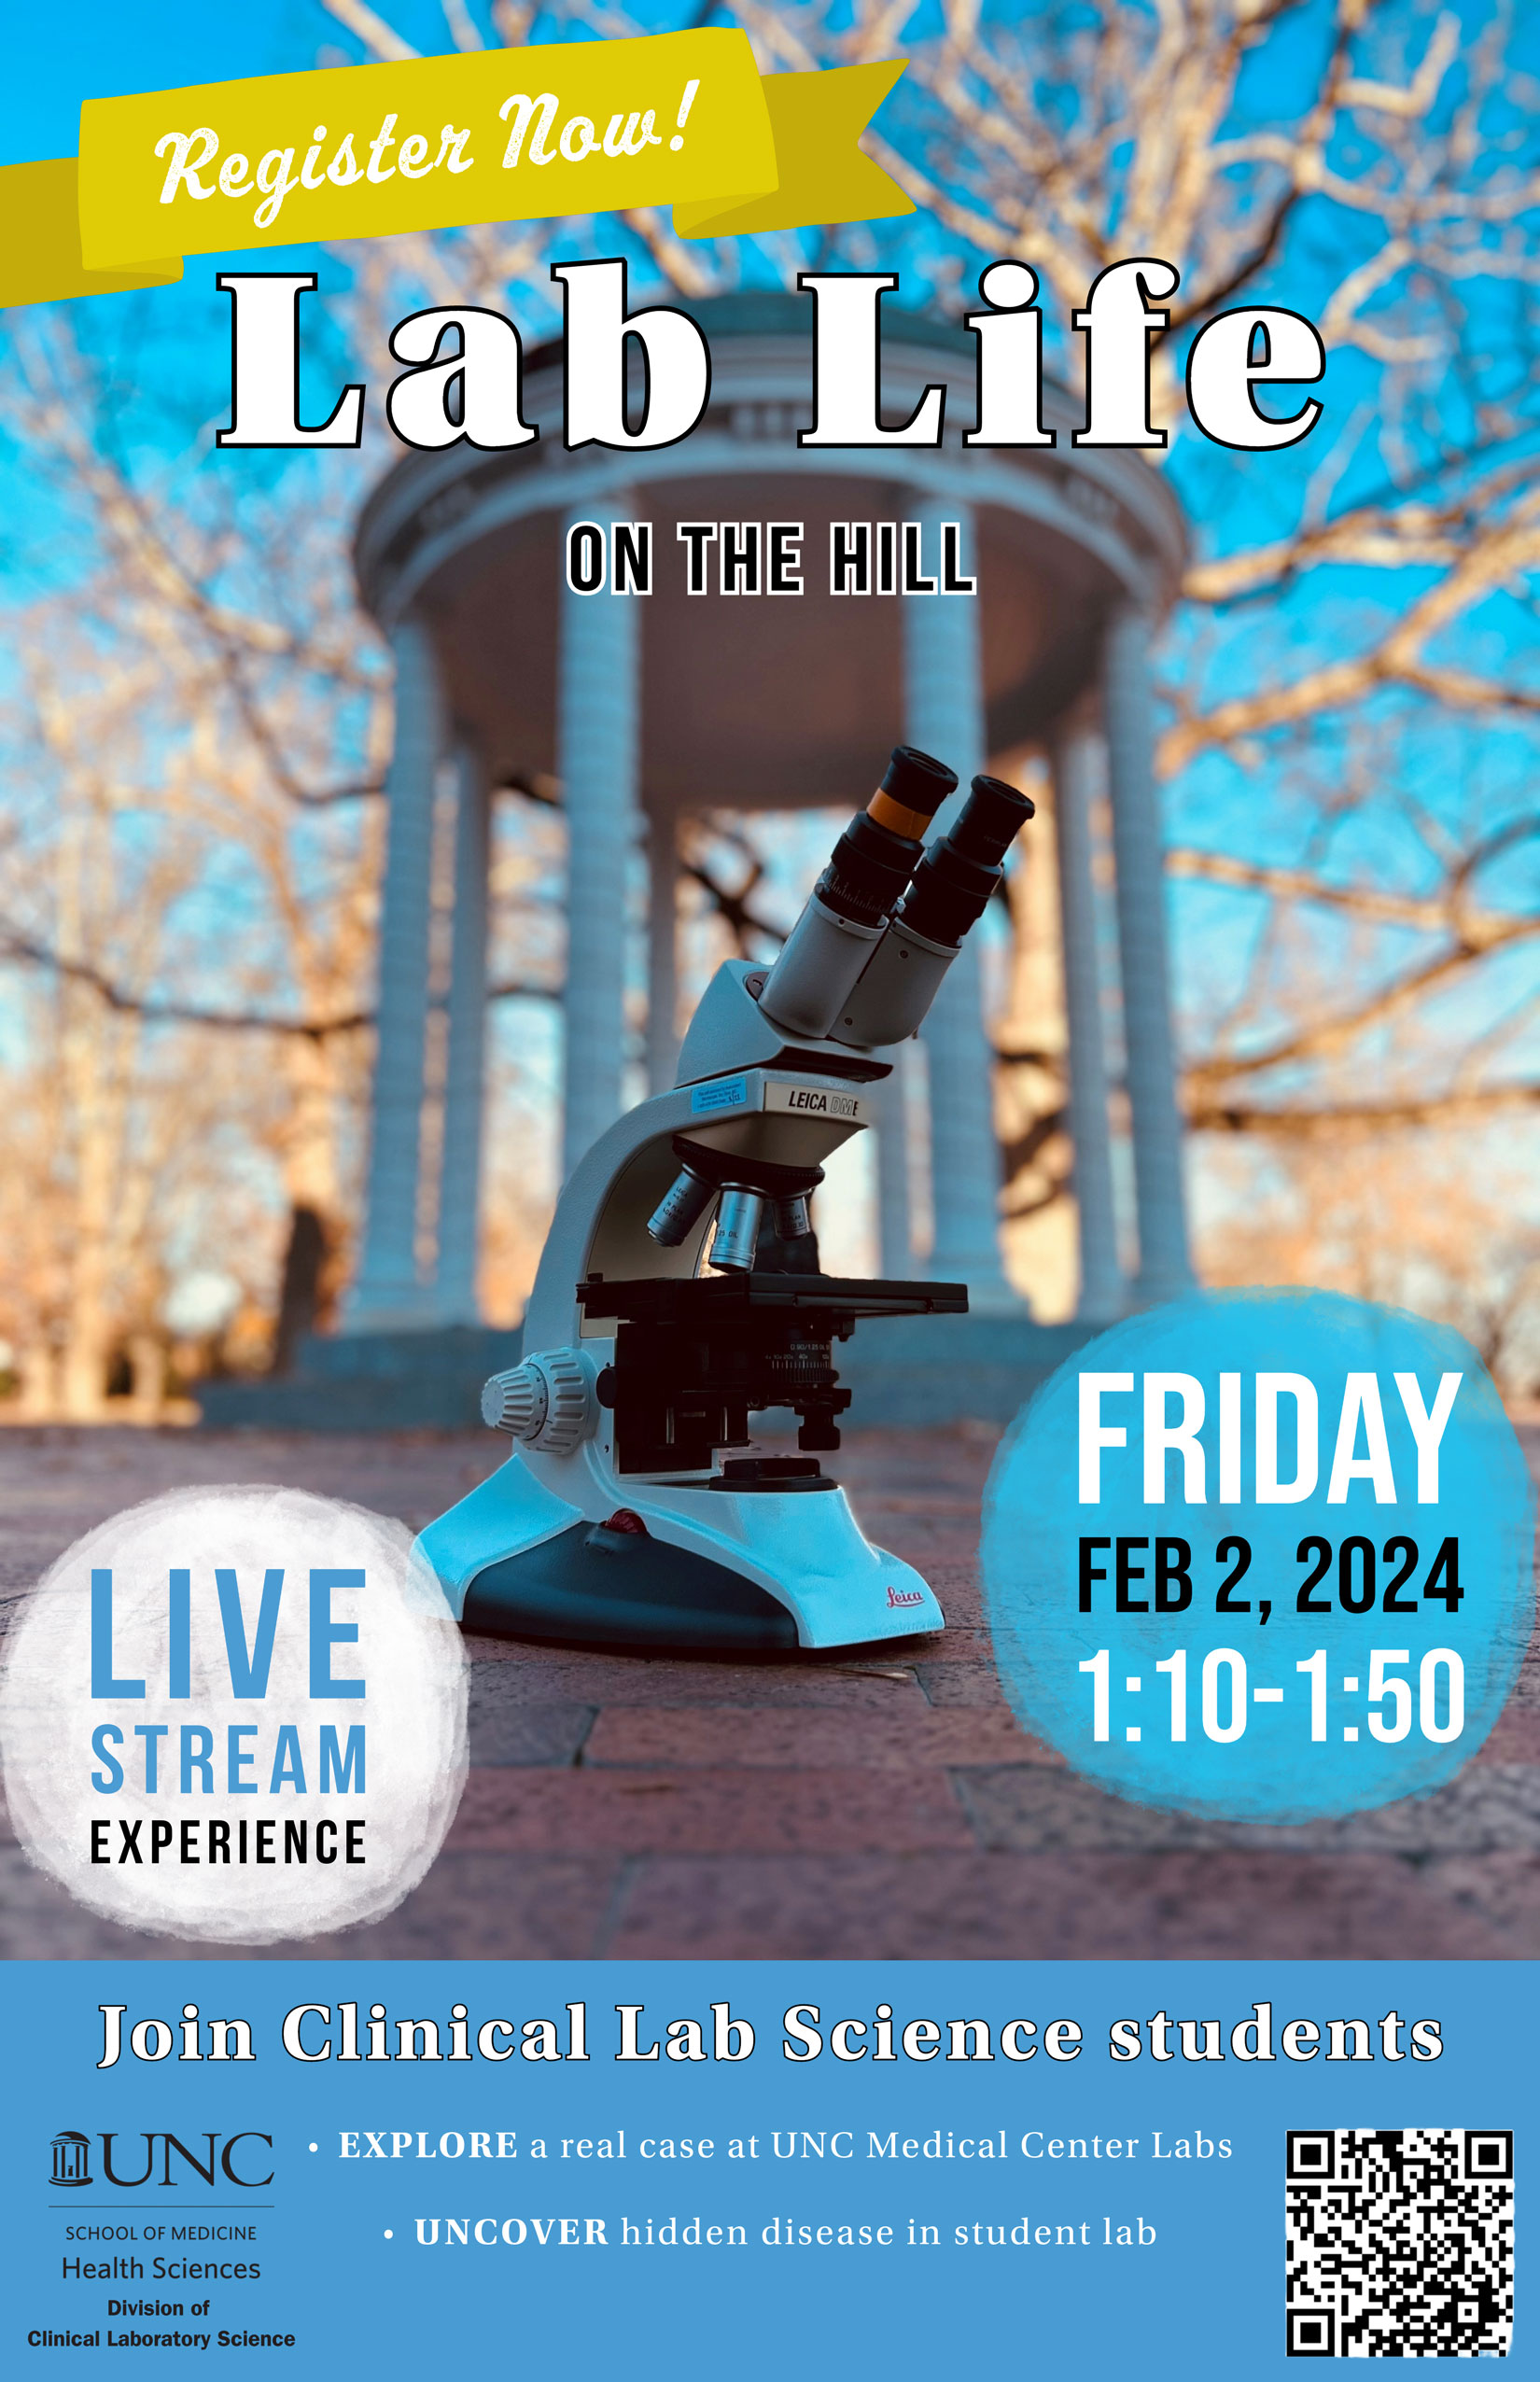 A microscope in front of the Old Well at UNC, advertising the Lab Life on the Hill live-stream event on February 2, 2024 from 1:10 - 1:50 pm.